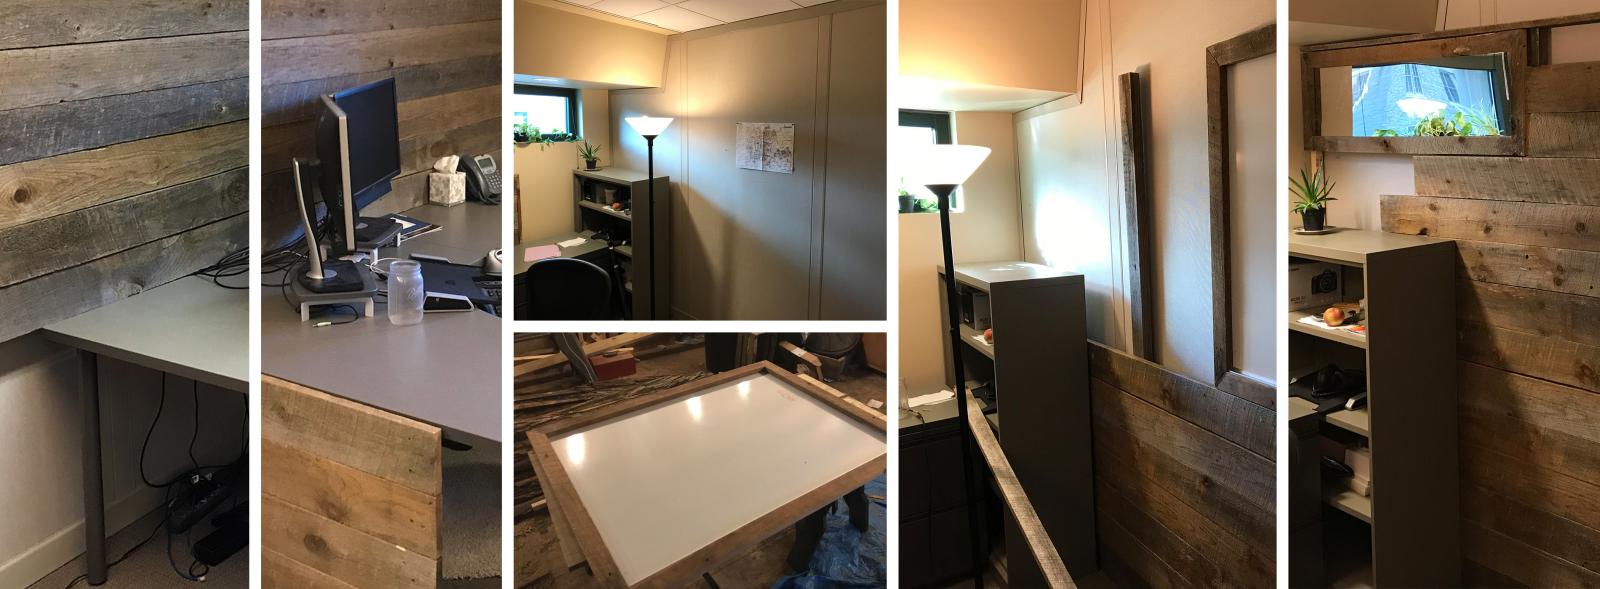 A collage of images throughout the build process, including partial walls, framing the whiteboard and attaching the mirror to the 2x4 strips.